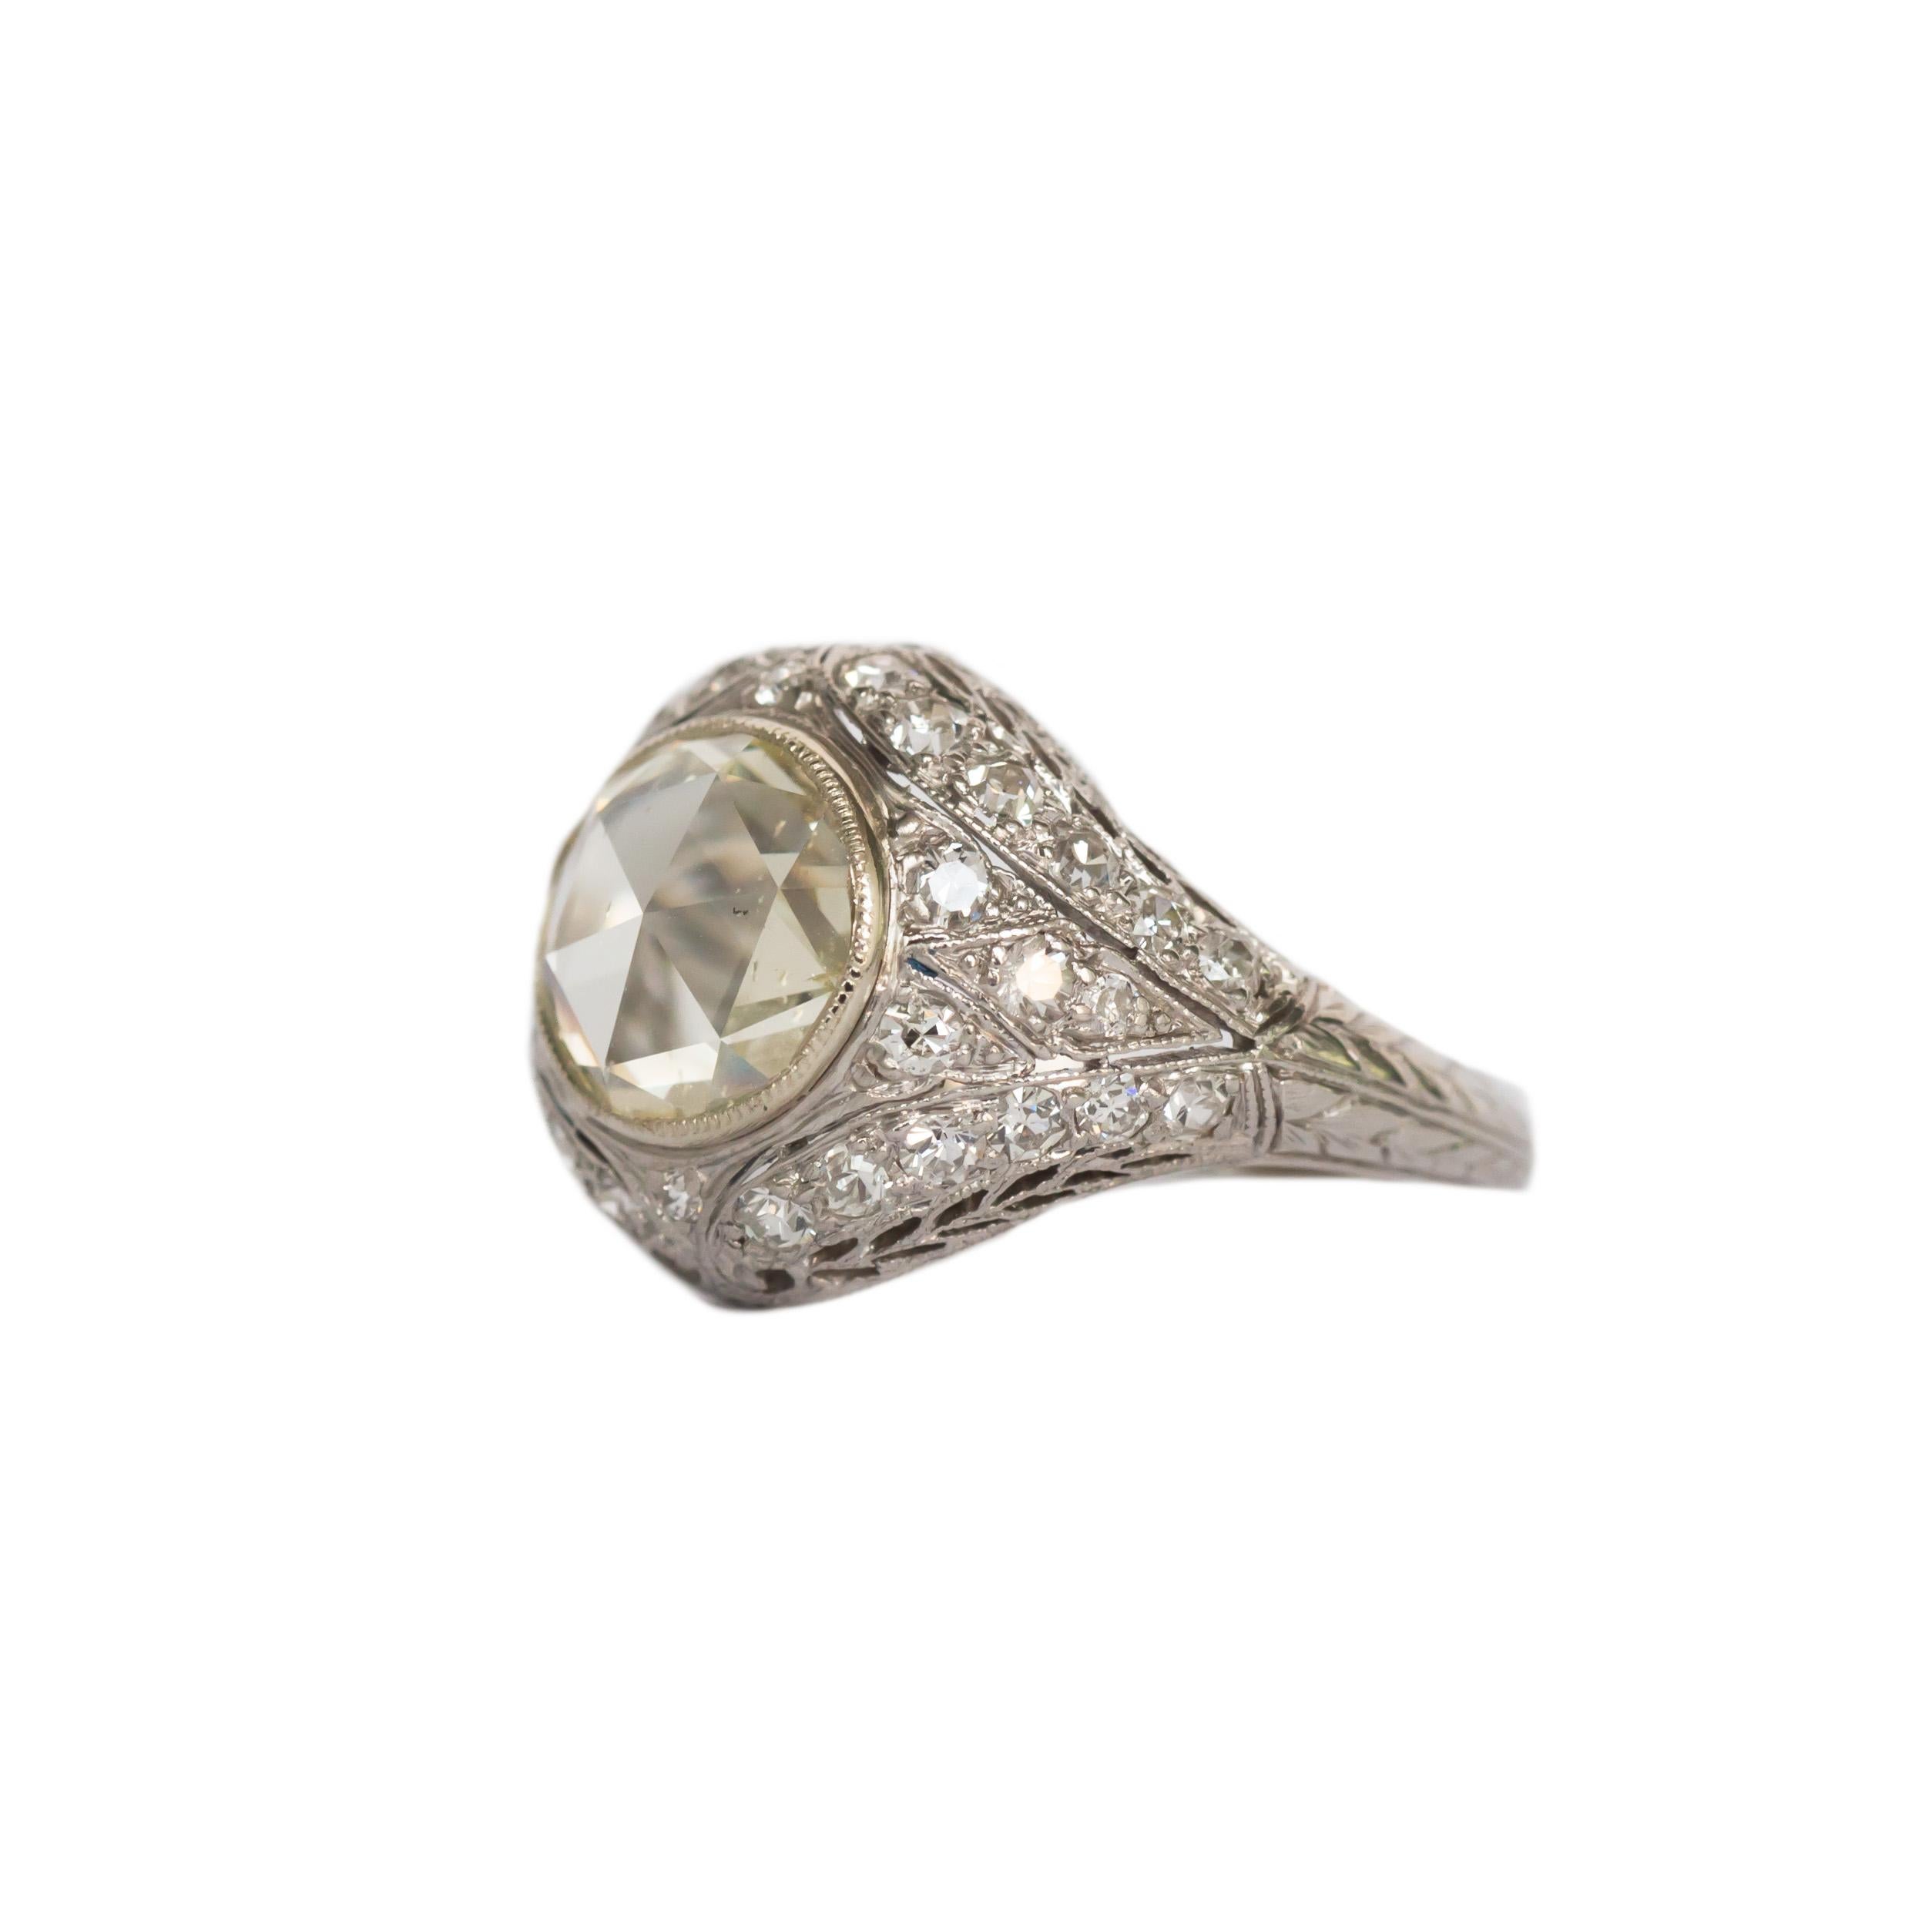 Ring Size: 4.90
Metal Type: Platinum
Weight: 4.7 grams

Center Diamond Details
Shape: Rose Cut 
Carat Weight: 1.71 carat
Color: L
Clarity: SI1

Side Stone Details: 
Shape: Antique European Cut 
Total Carat Weight: .25 carat, total weight
Color: